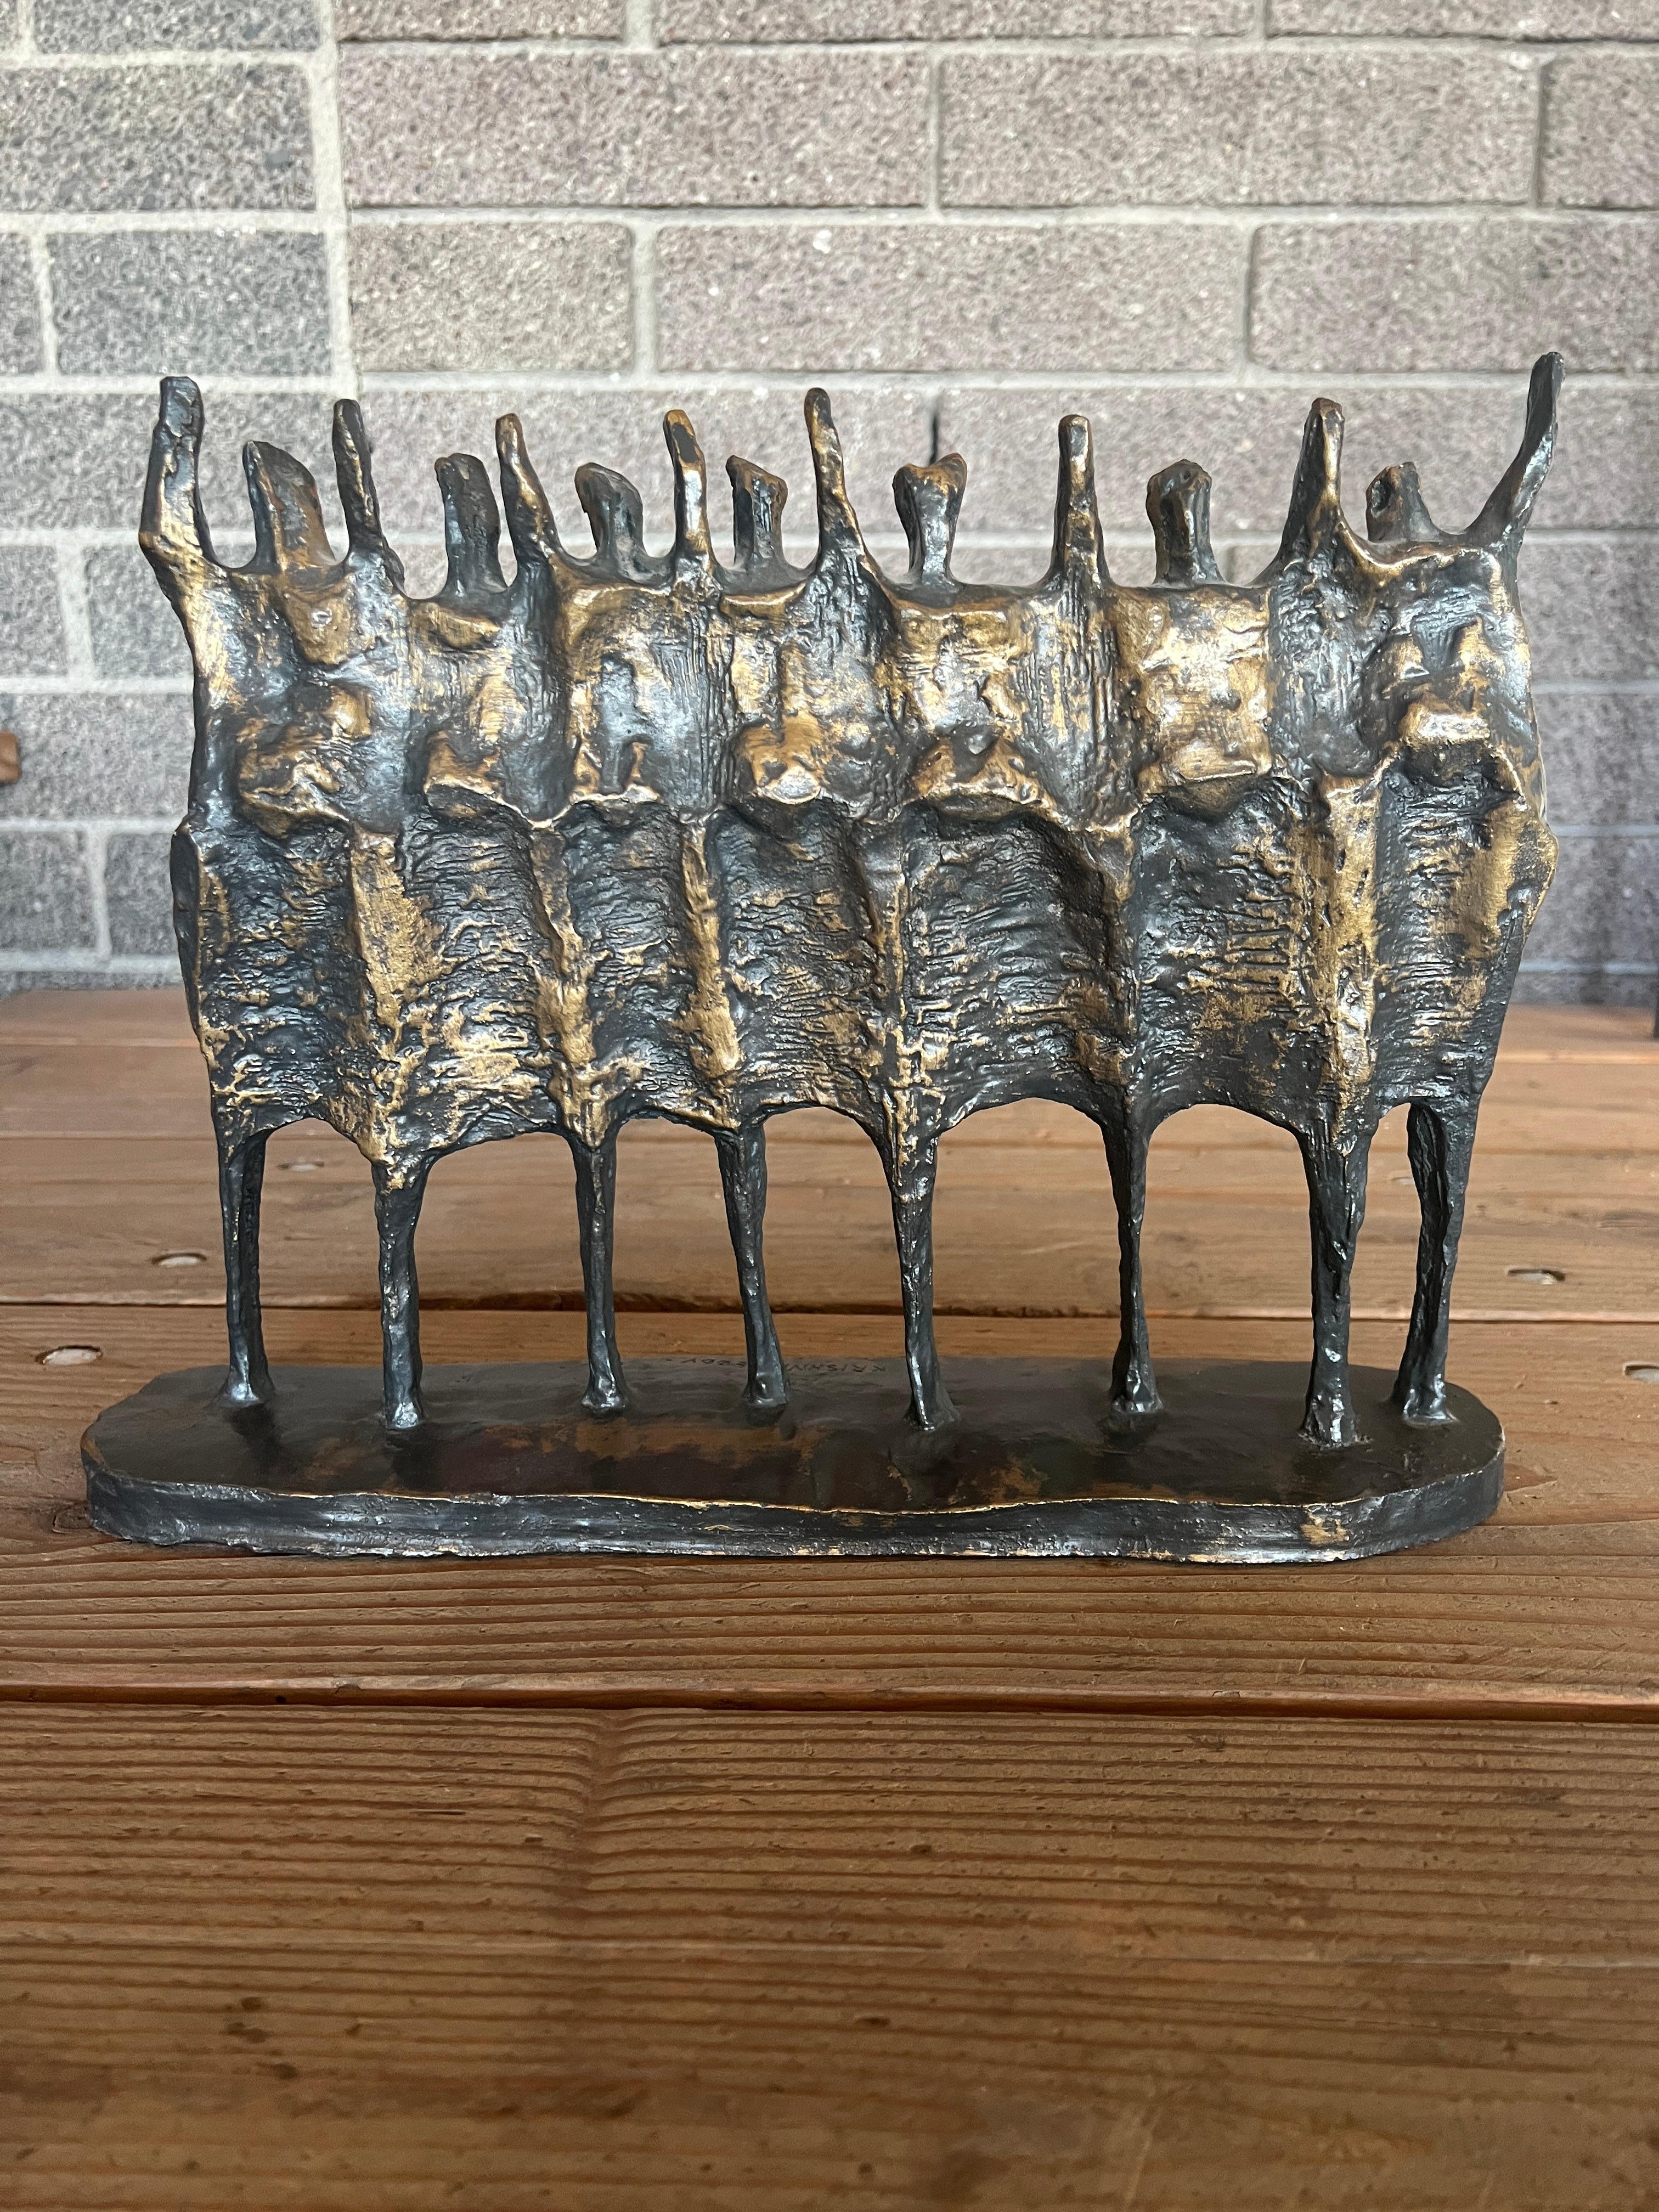 Figural brutalist style resin sculpture by Krishna Reddy circa late 1970's. The artwork shows a line of abstracted figures with arms raised with a rich bronze-like patina. The artist's signature can be found on the base of the sculpture. 